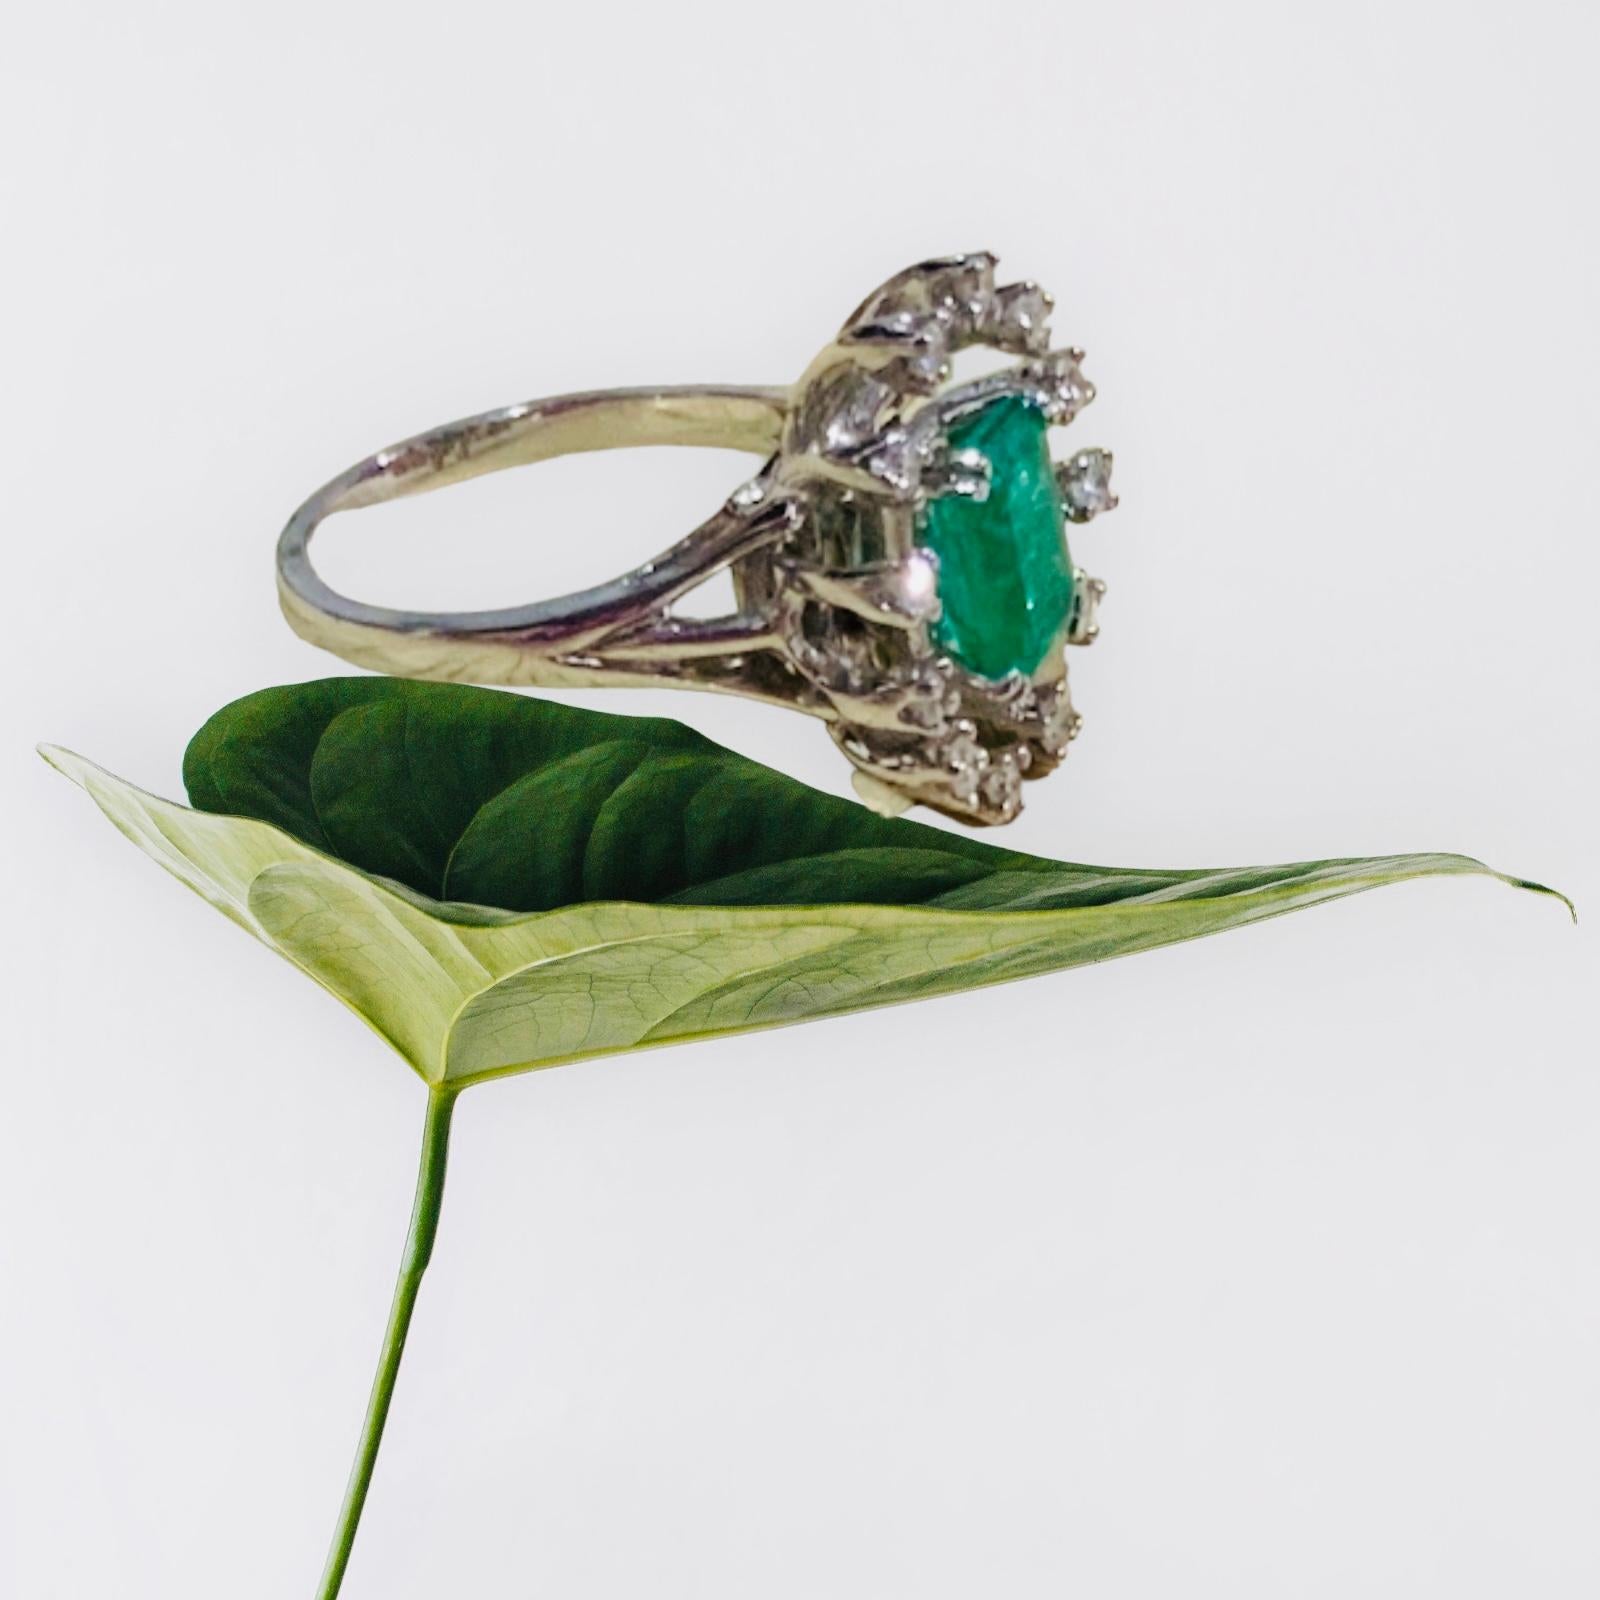 This is a Lady’s 14K white gold Emerald and Diamonds ring. It depicts an emerald cut Emerald (8.4x 6.1 x 3.66mm; Color- vivid greenish blue, Clarity- natural garden inclusion, Type- beryl/emerald and Weight- 1.27carats) mounted in prong setting and